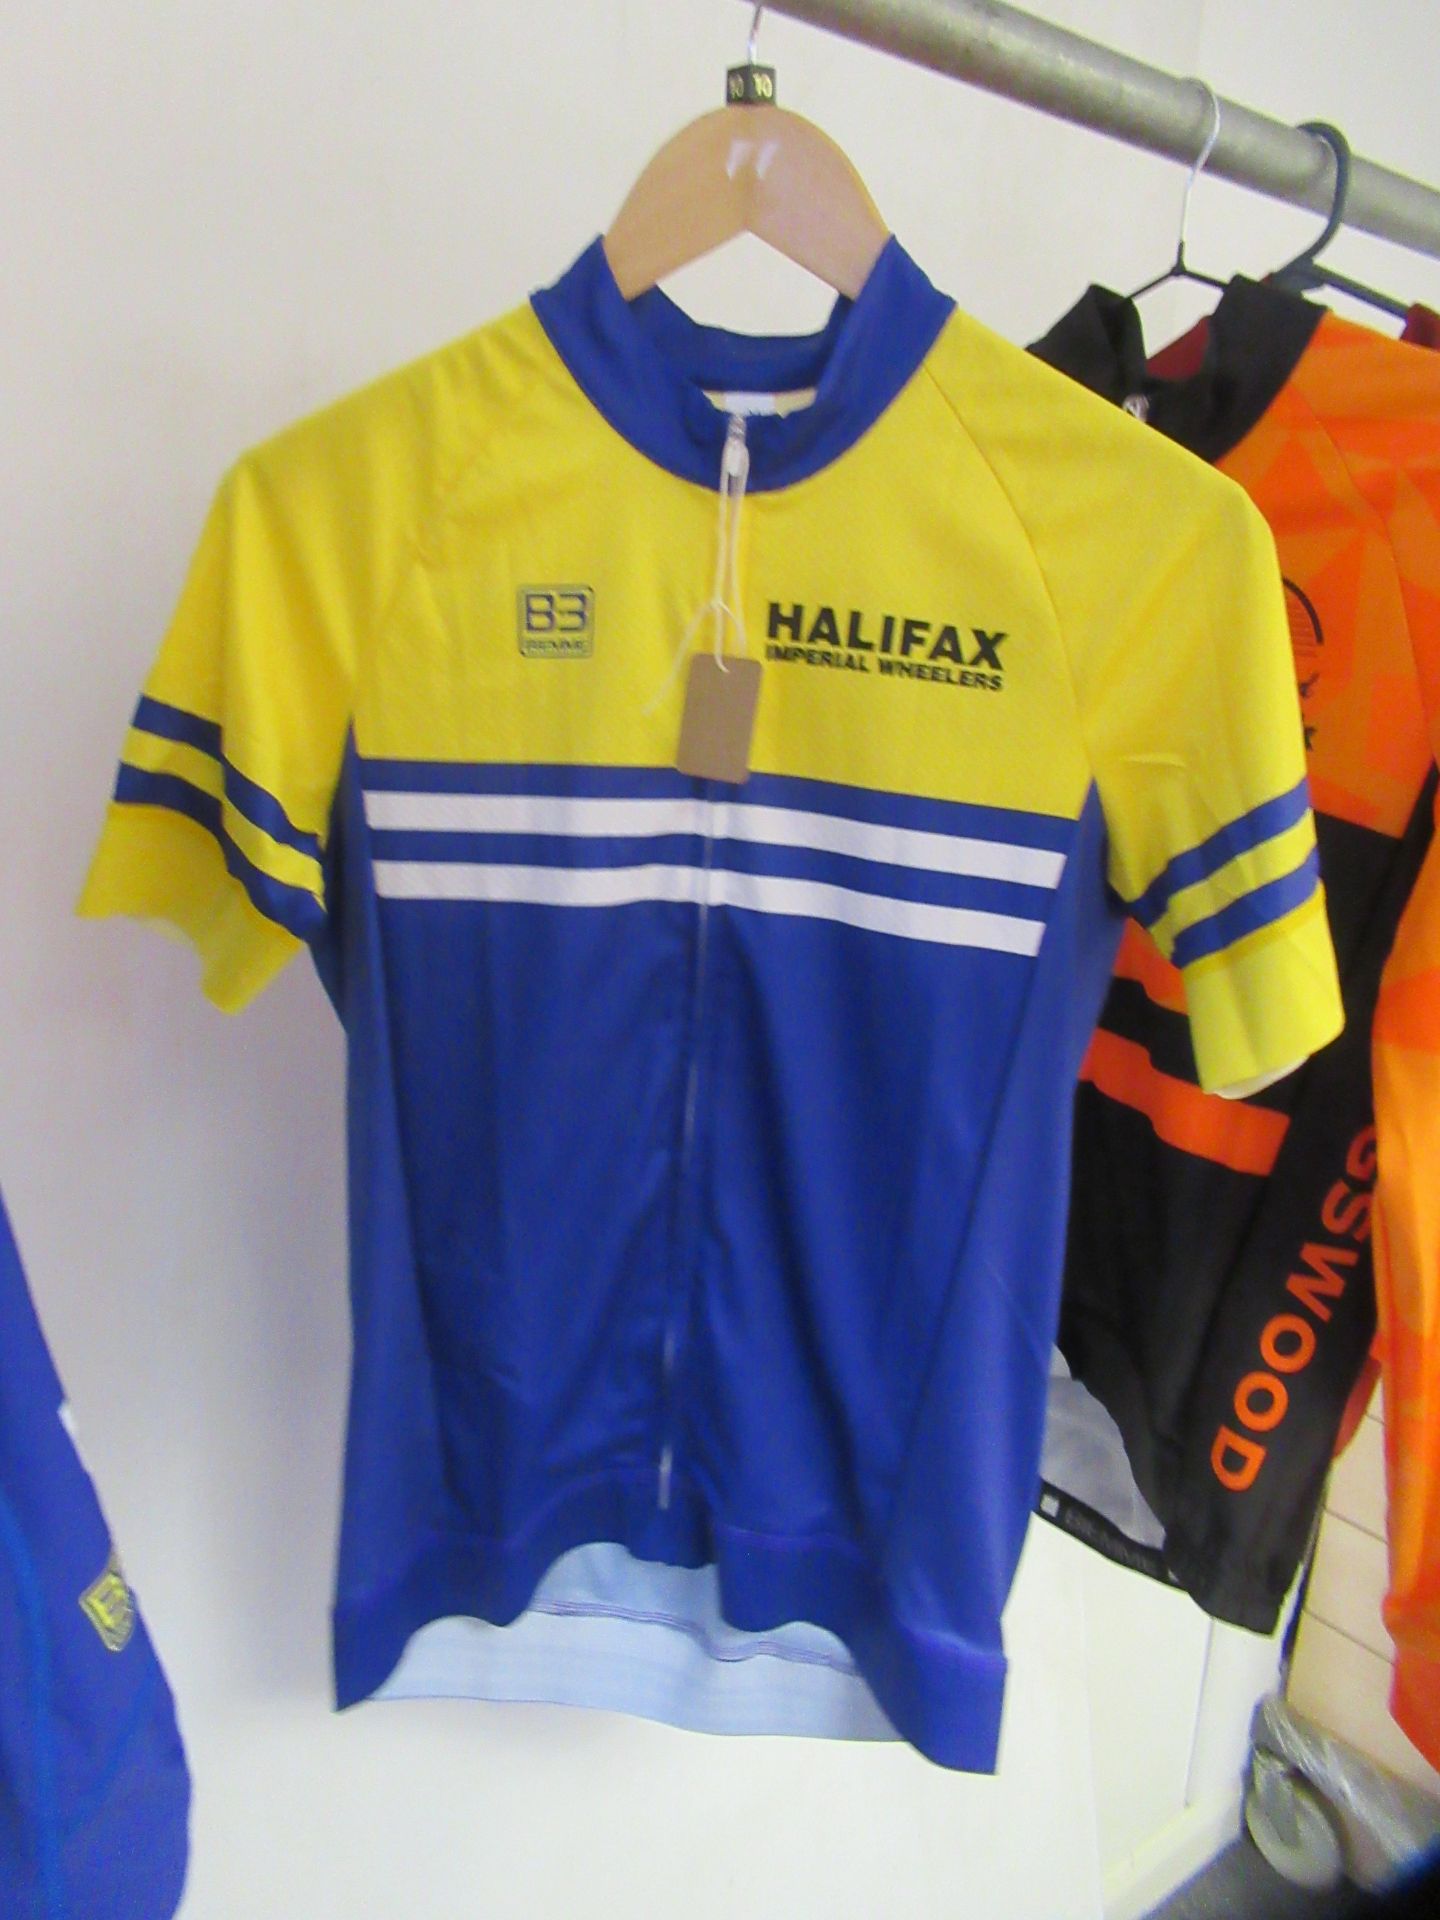 M Male Cycling Clothes - Image 5 of 7